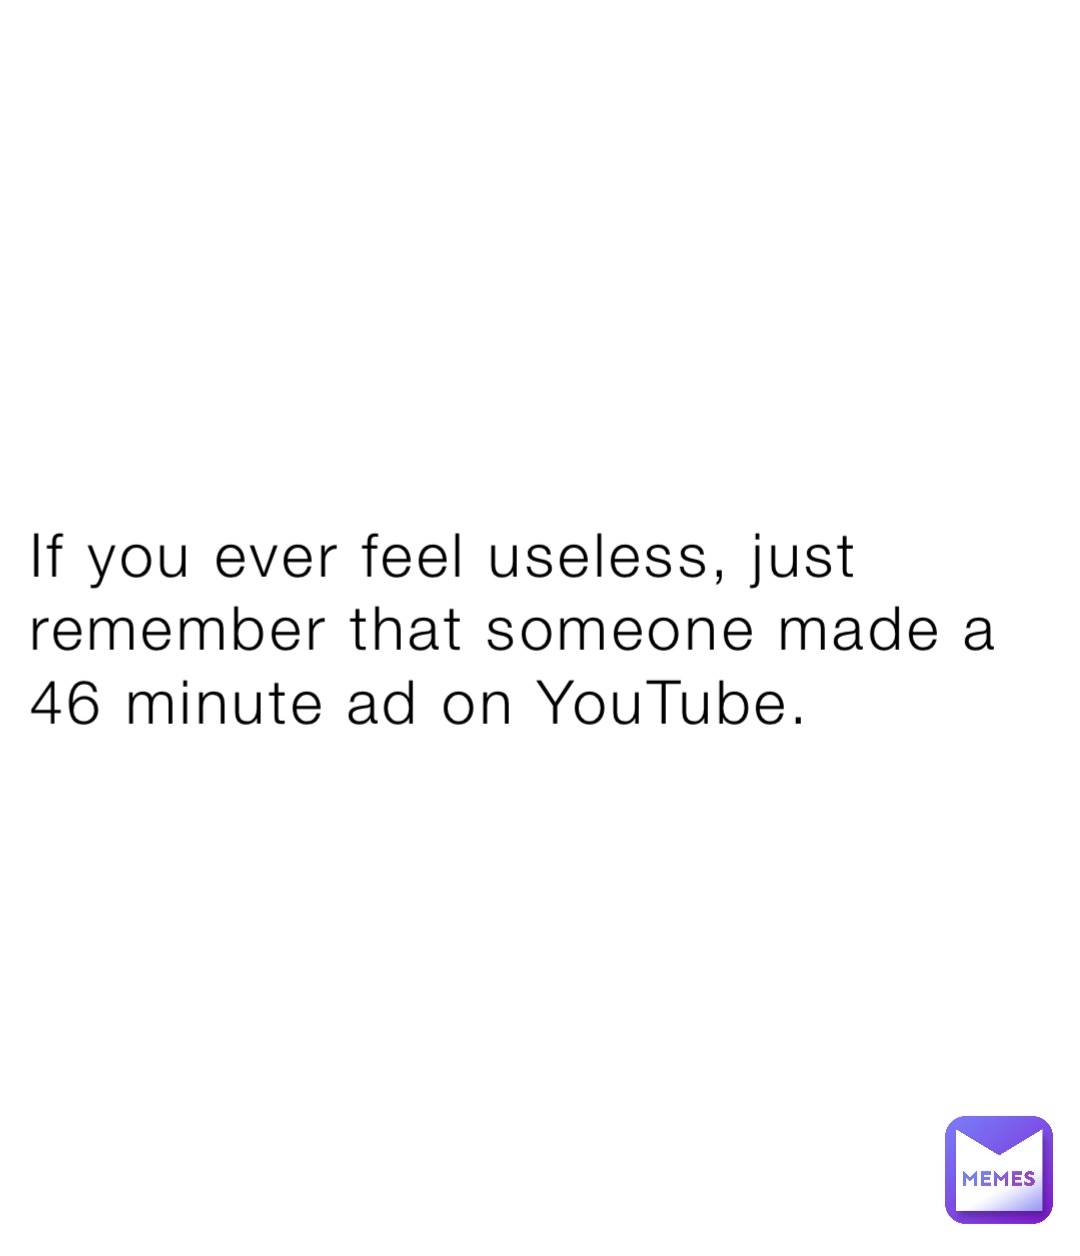 If you ever feel useless, just remember that someone made a 46 minute ad on YouTube.